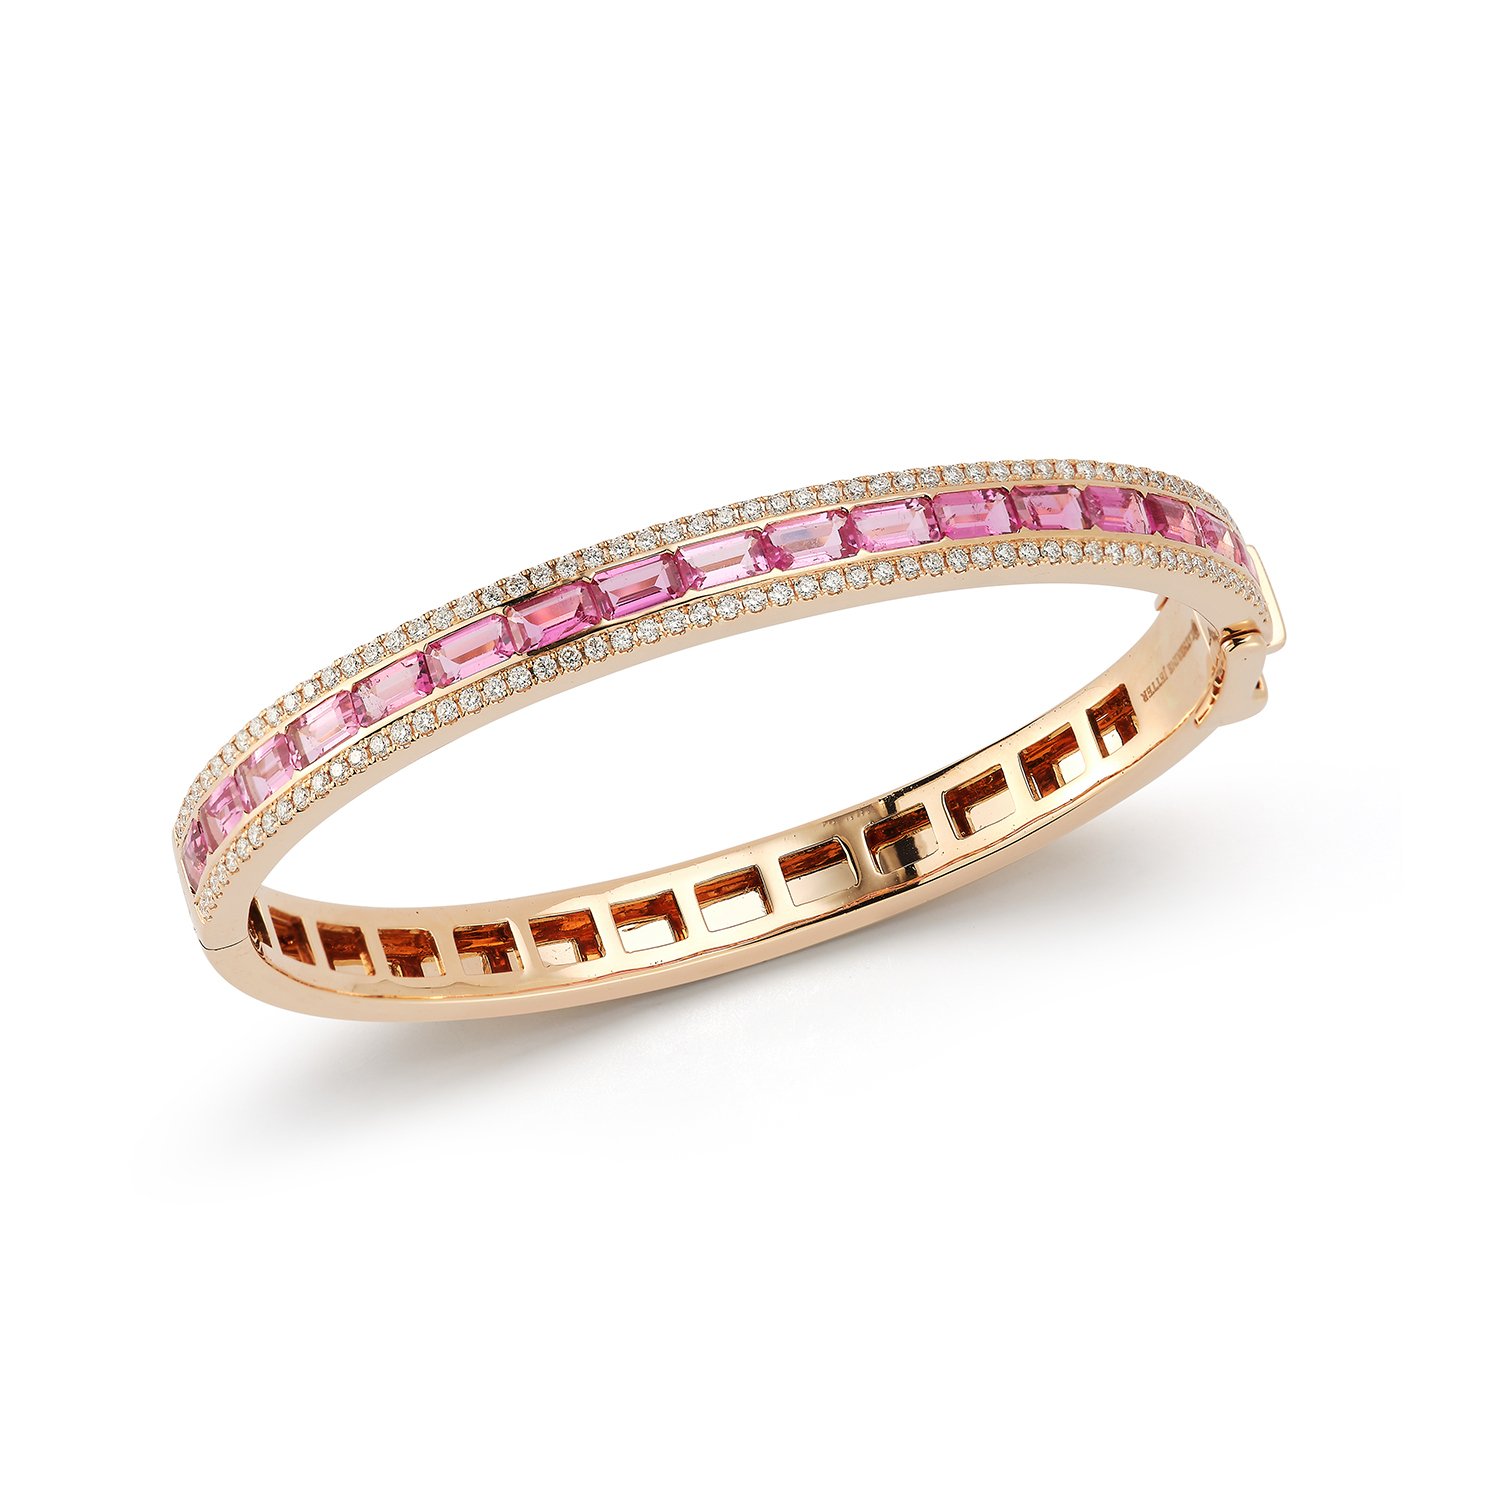 Origami Bangle Bracelet with Rubellite and White Diamonds in 18kt Rose Gold